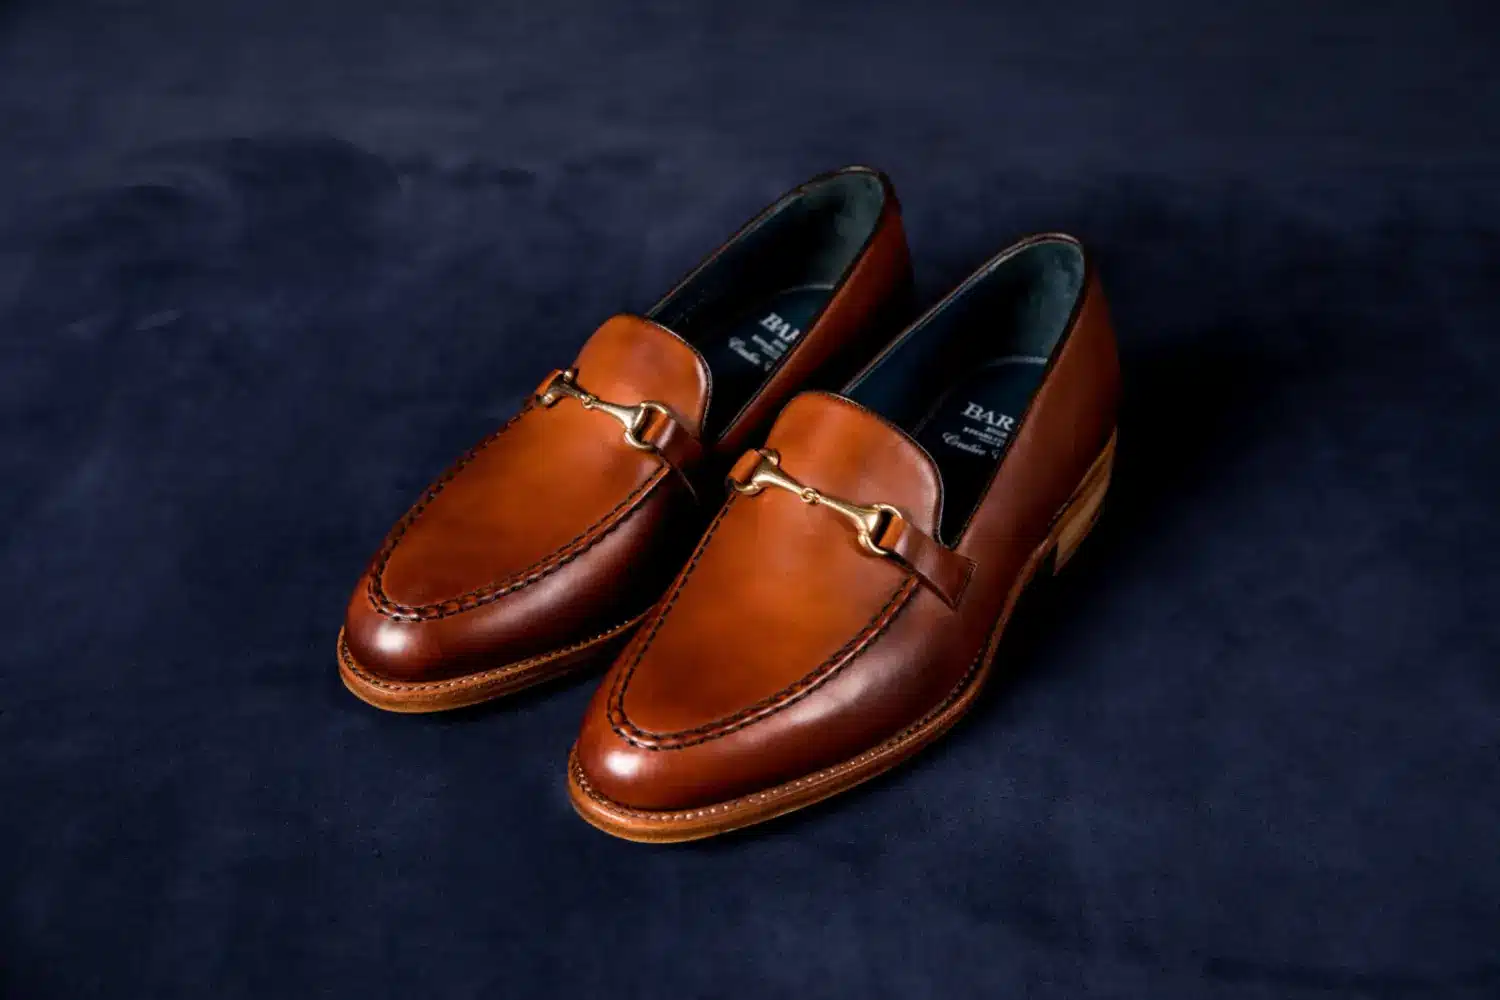 leather loafers on a dark background